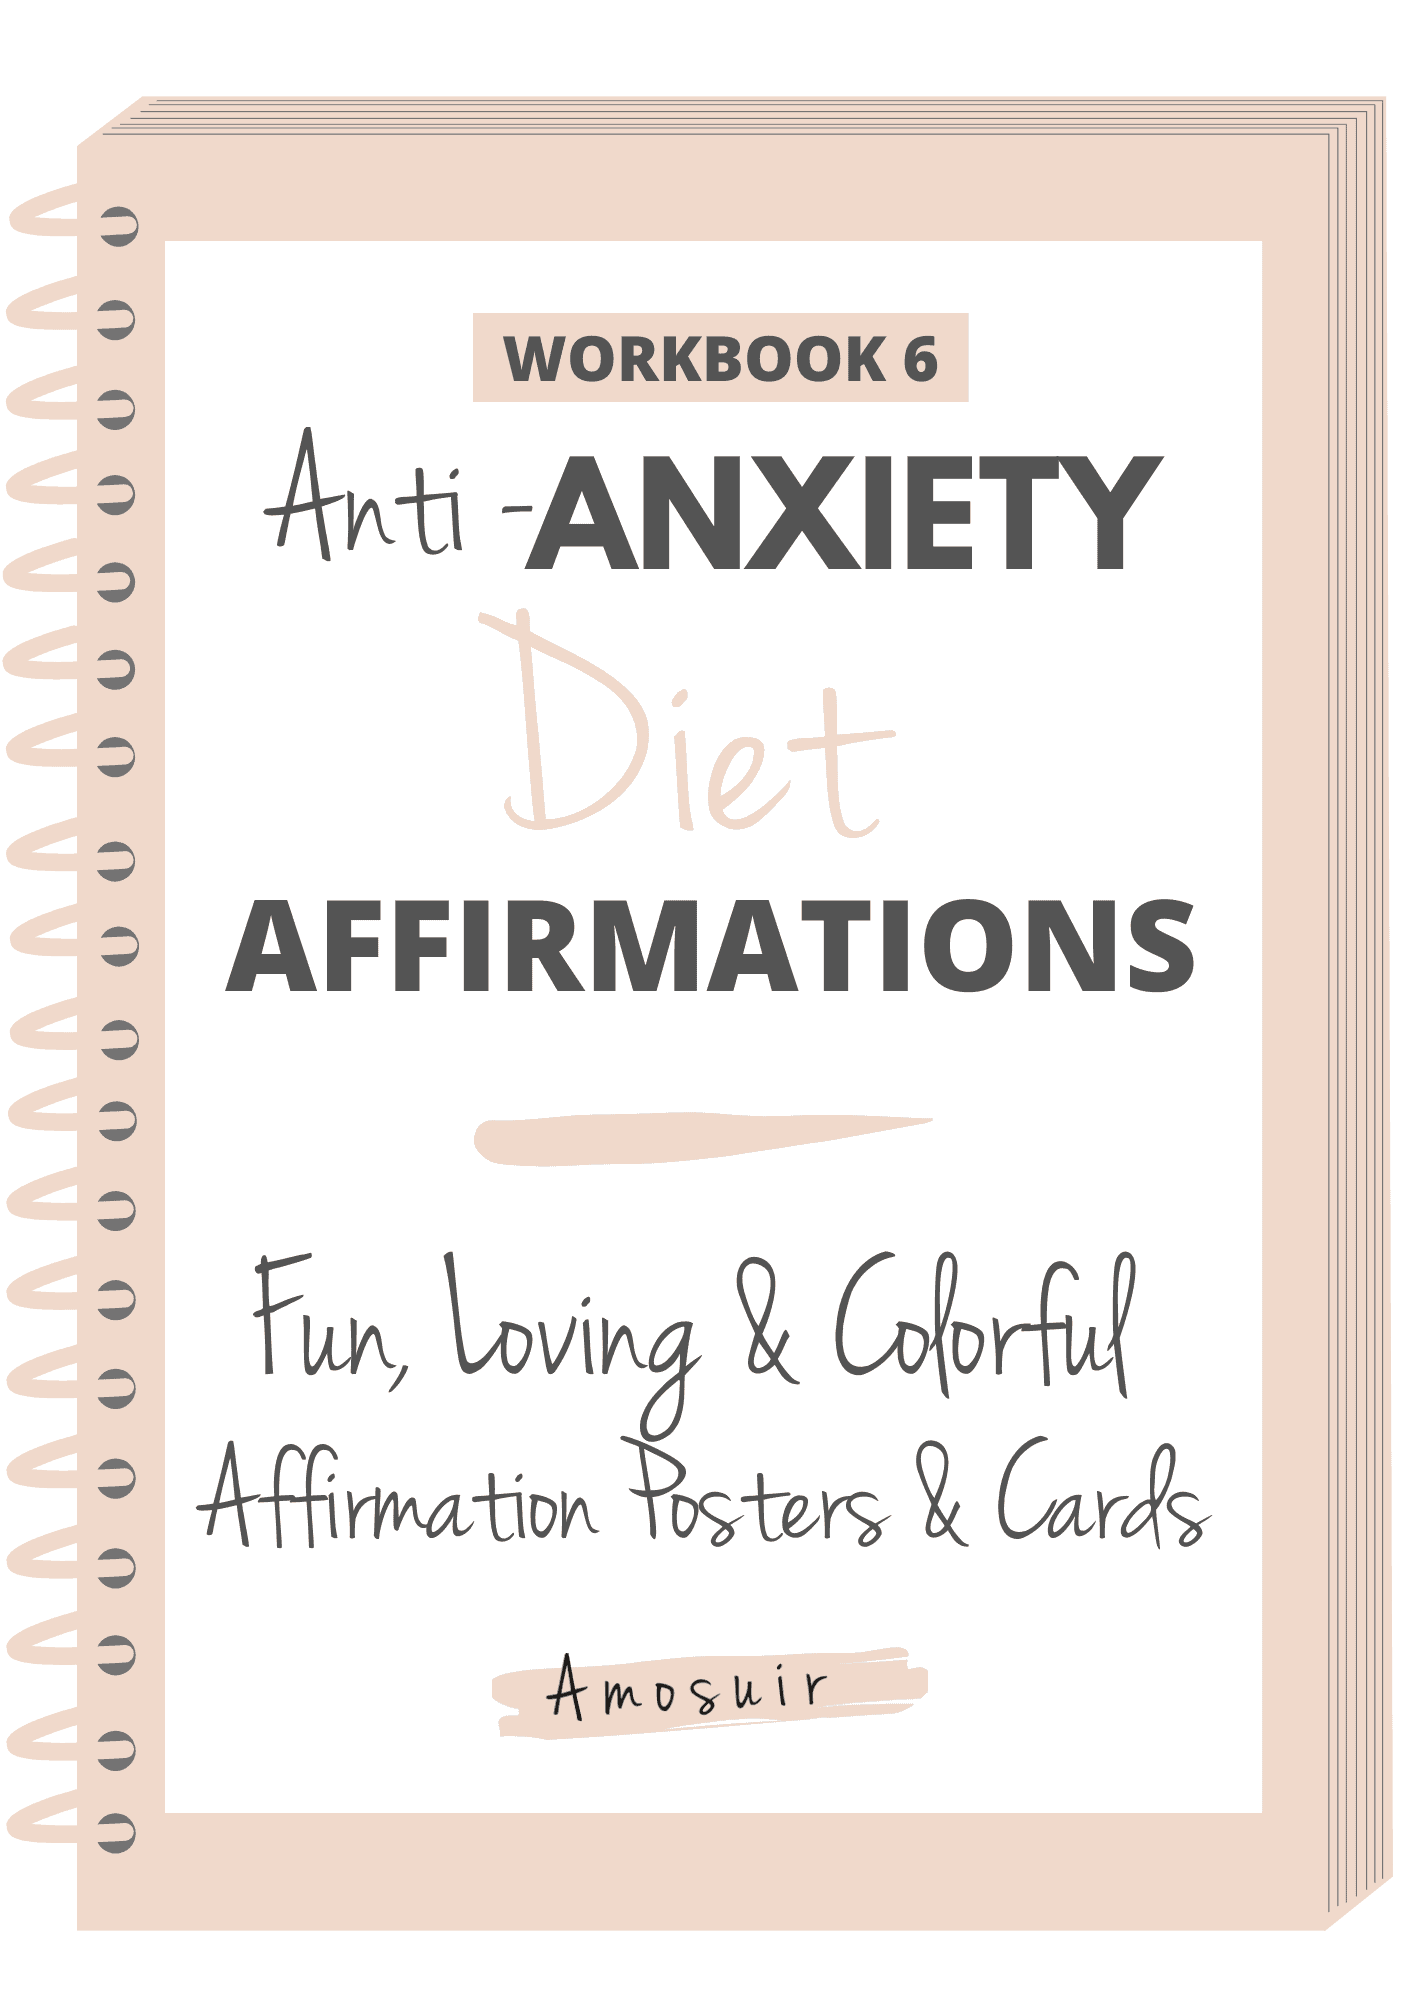 Anti-anxiety diet affirmations workbook front cover